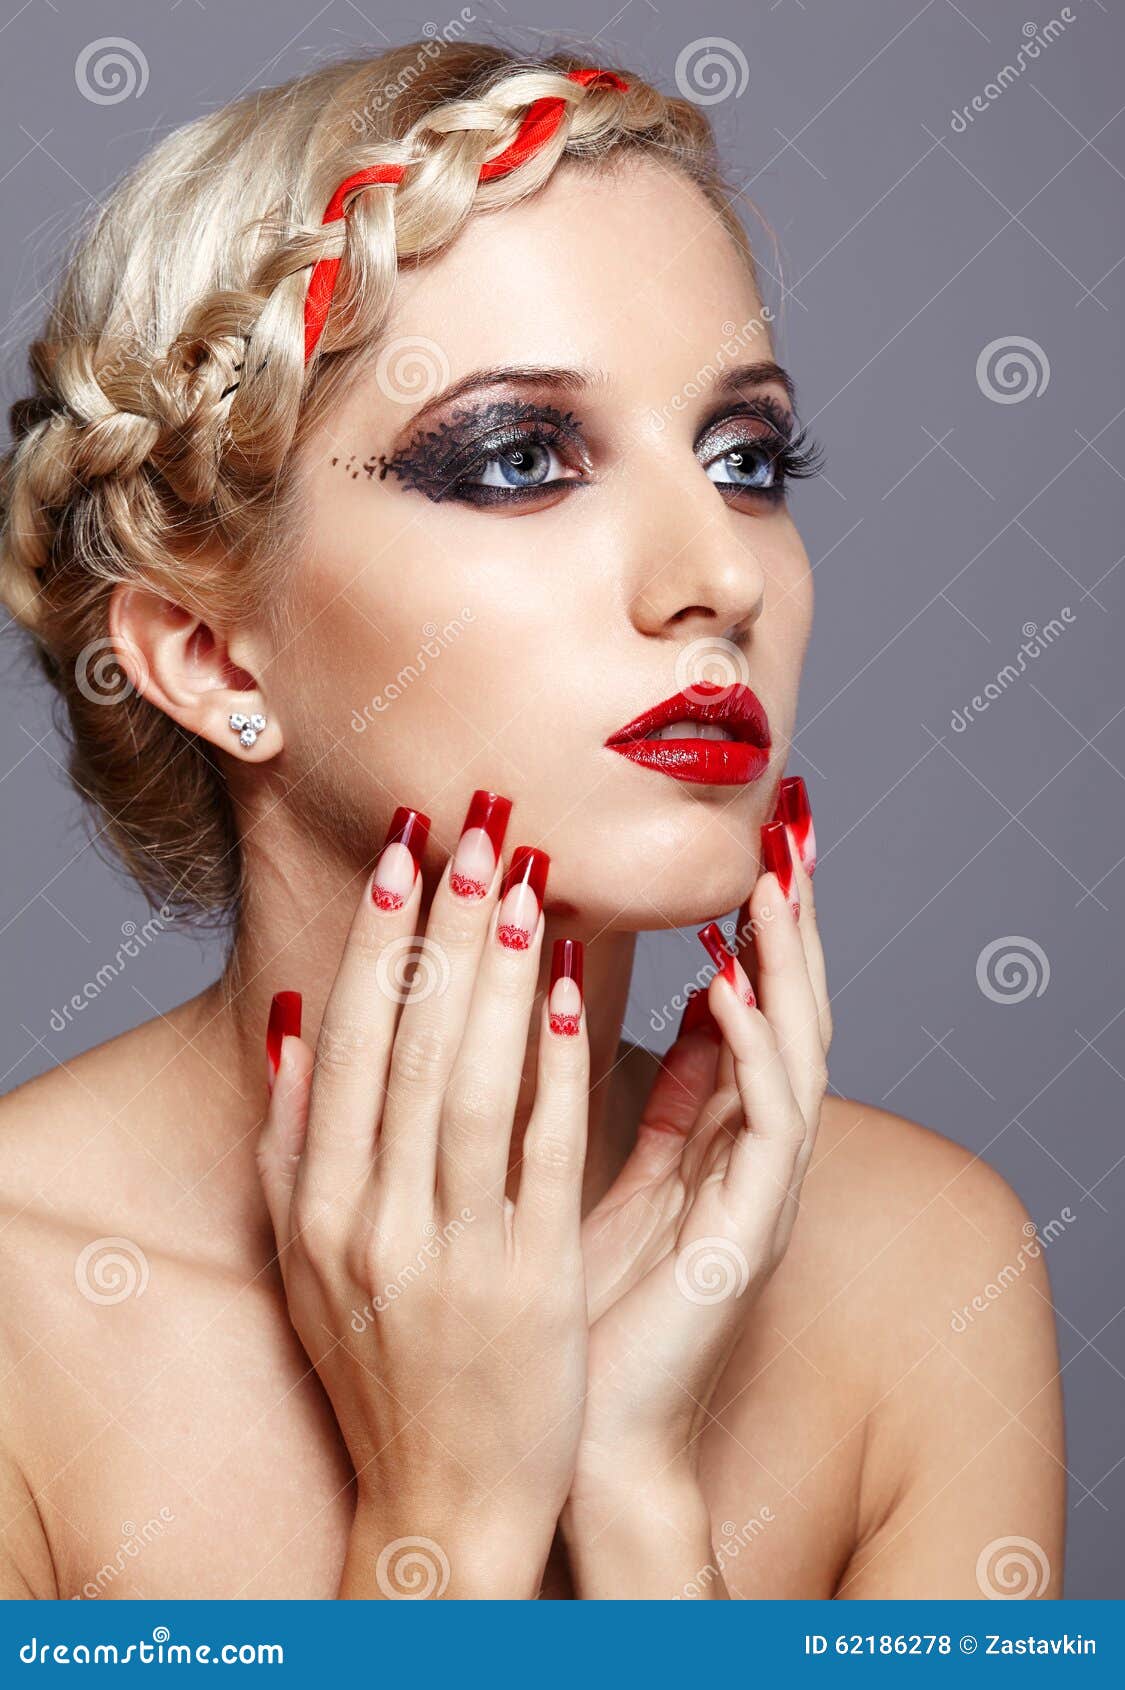 Young woman with red nails stock photo. Image of hair - 62186278